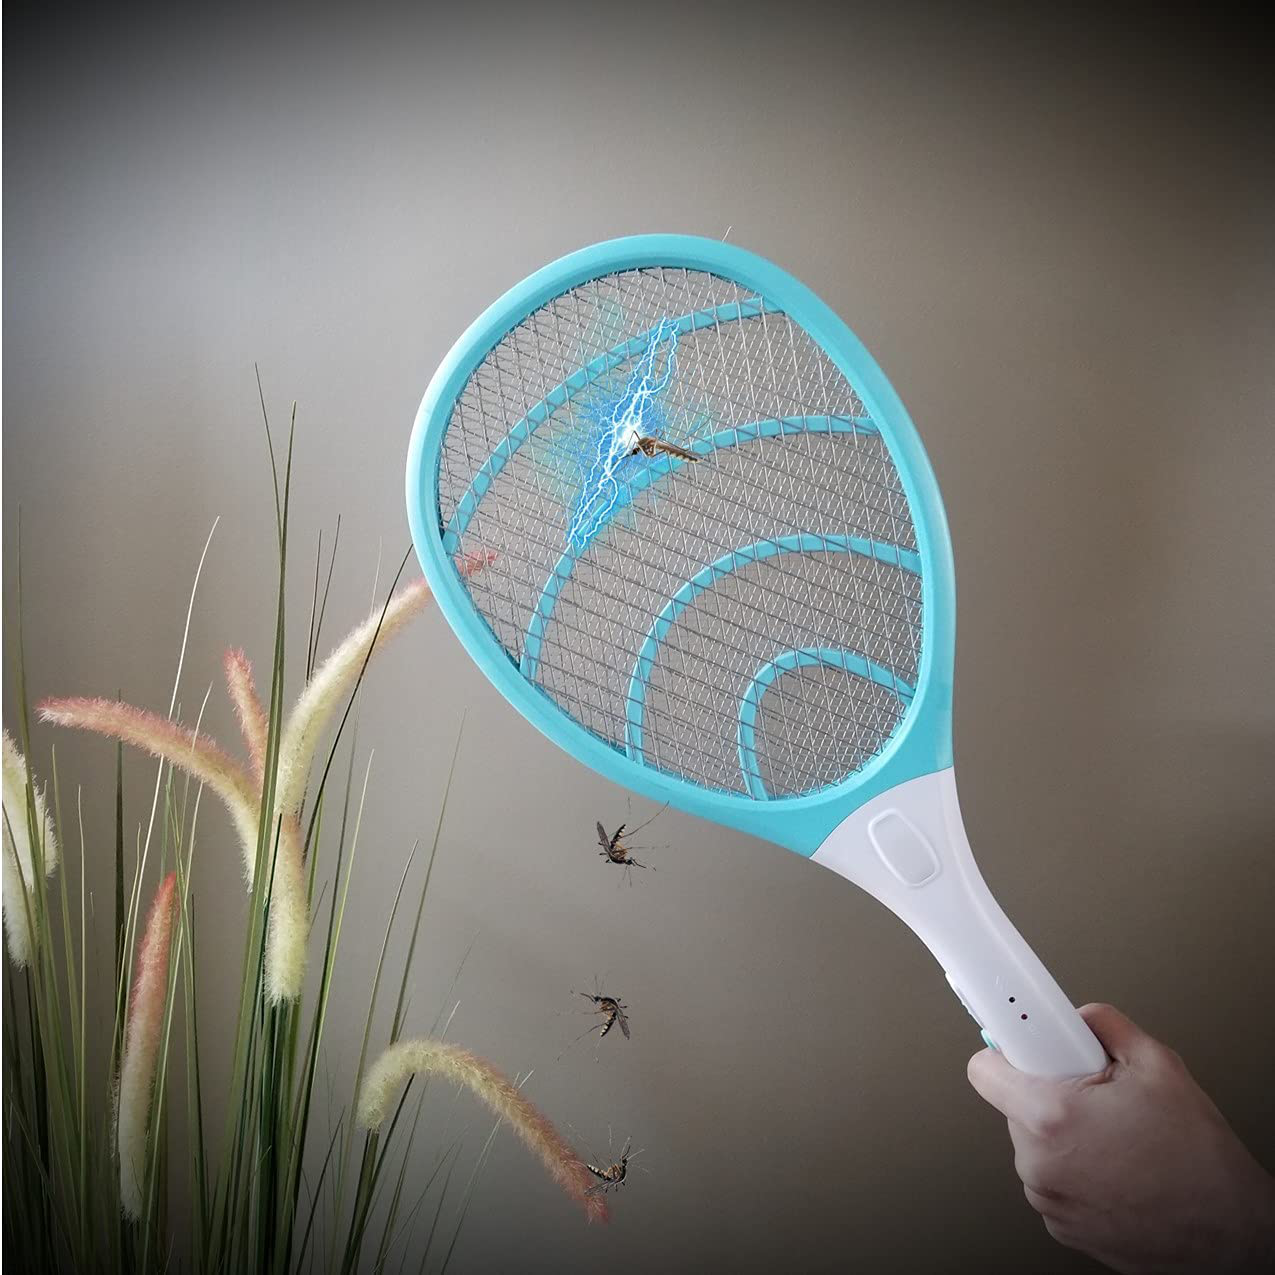 Rechargeable Electric Powerful Bug Zapper Fly Swatter Racket, Handheld Wasp Mosquitoes Flies Insects Killer Racquet for Indoor and Outdoor Pest Control Bat, eco Friendly Safe 4000 Volt, Blue/Gray